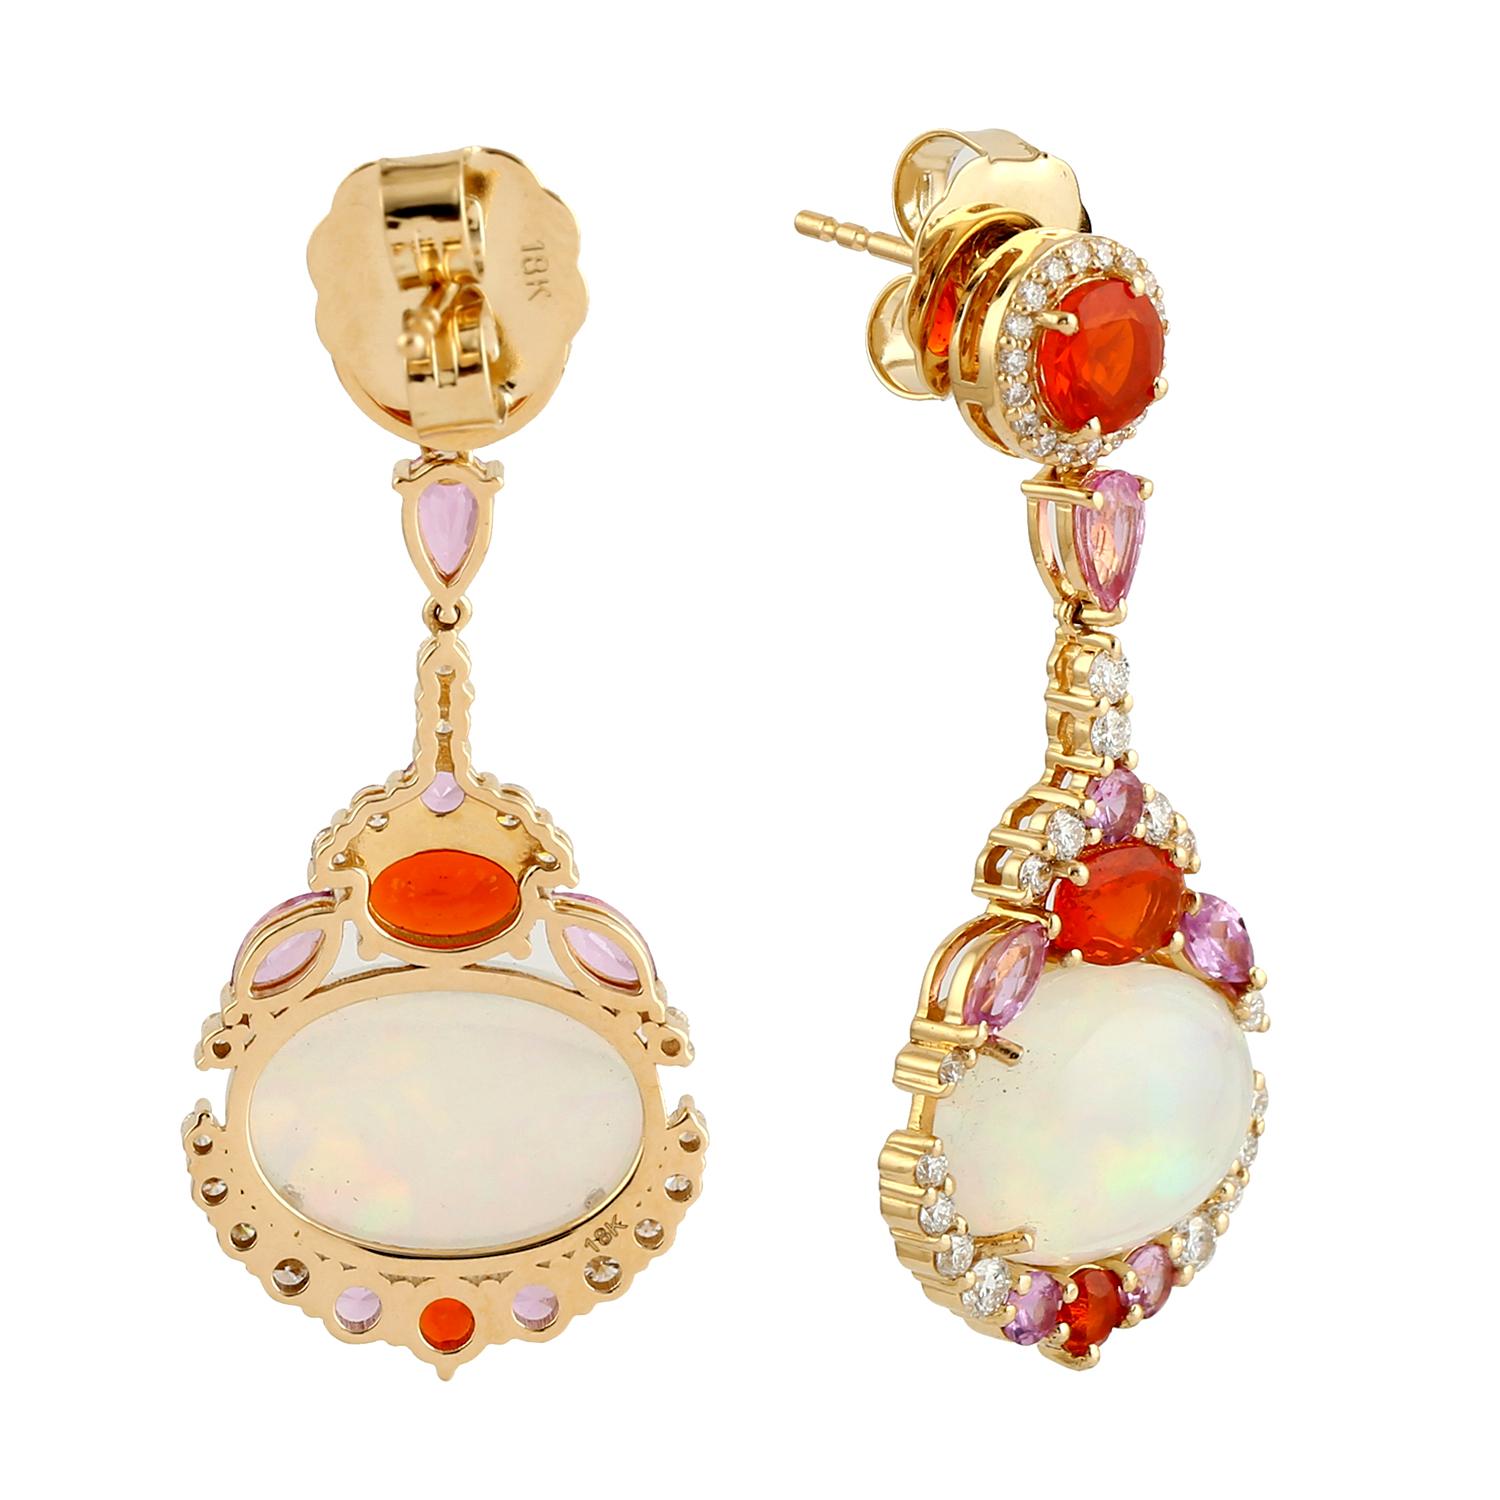 Cast in 18 karat gold. These stud earrings are hand set in 5.91 carats Ethiopian opal, 1.62 carats pink sapphire, 1.45 carats fire opal and .86 carats of sparkling diamonds. 

FOLLOW MEGHNA JEWELS storefront to view the latest collection & exclusive